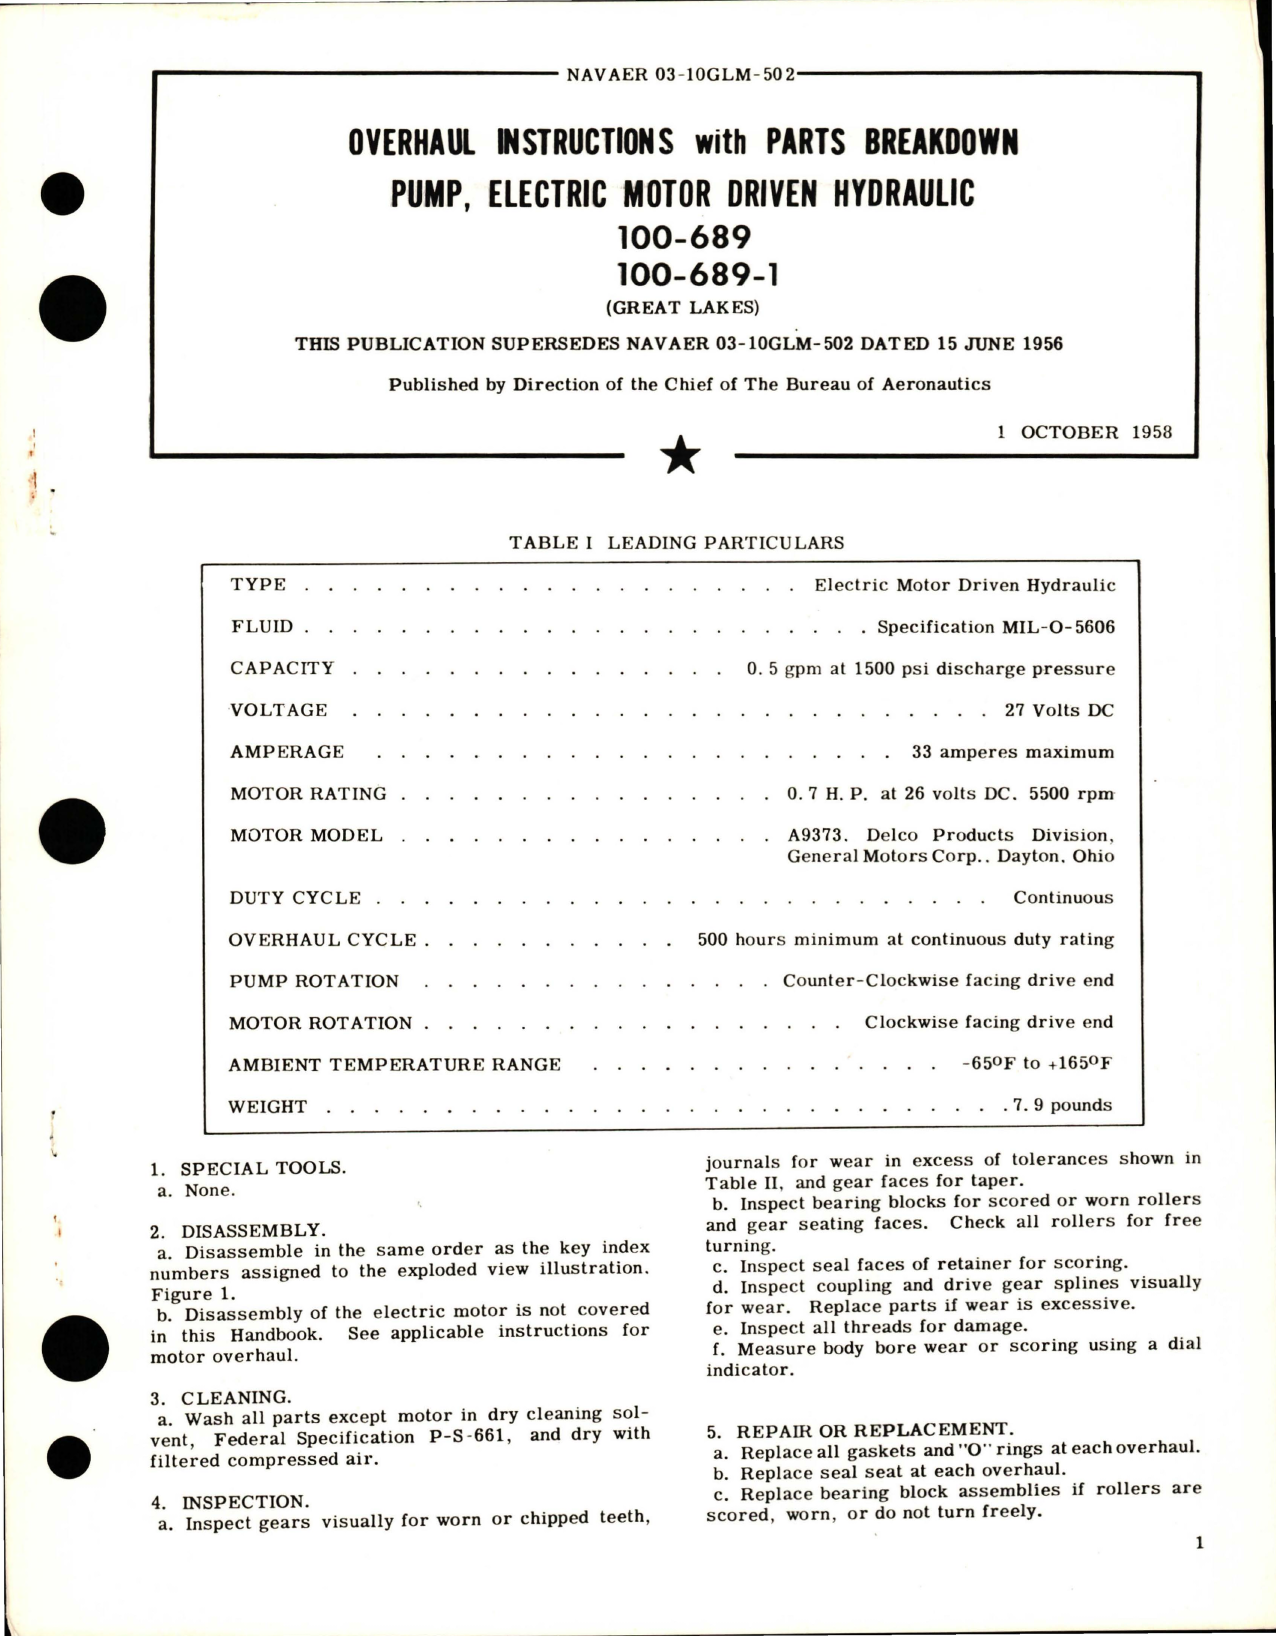 Sample page 1 from AirCorps Library document: Overhaul Instructions w Parts for Electric Motor Driven Hydraulic Pump - 100-689 and 100-689-1